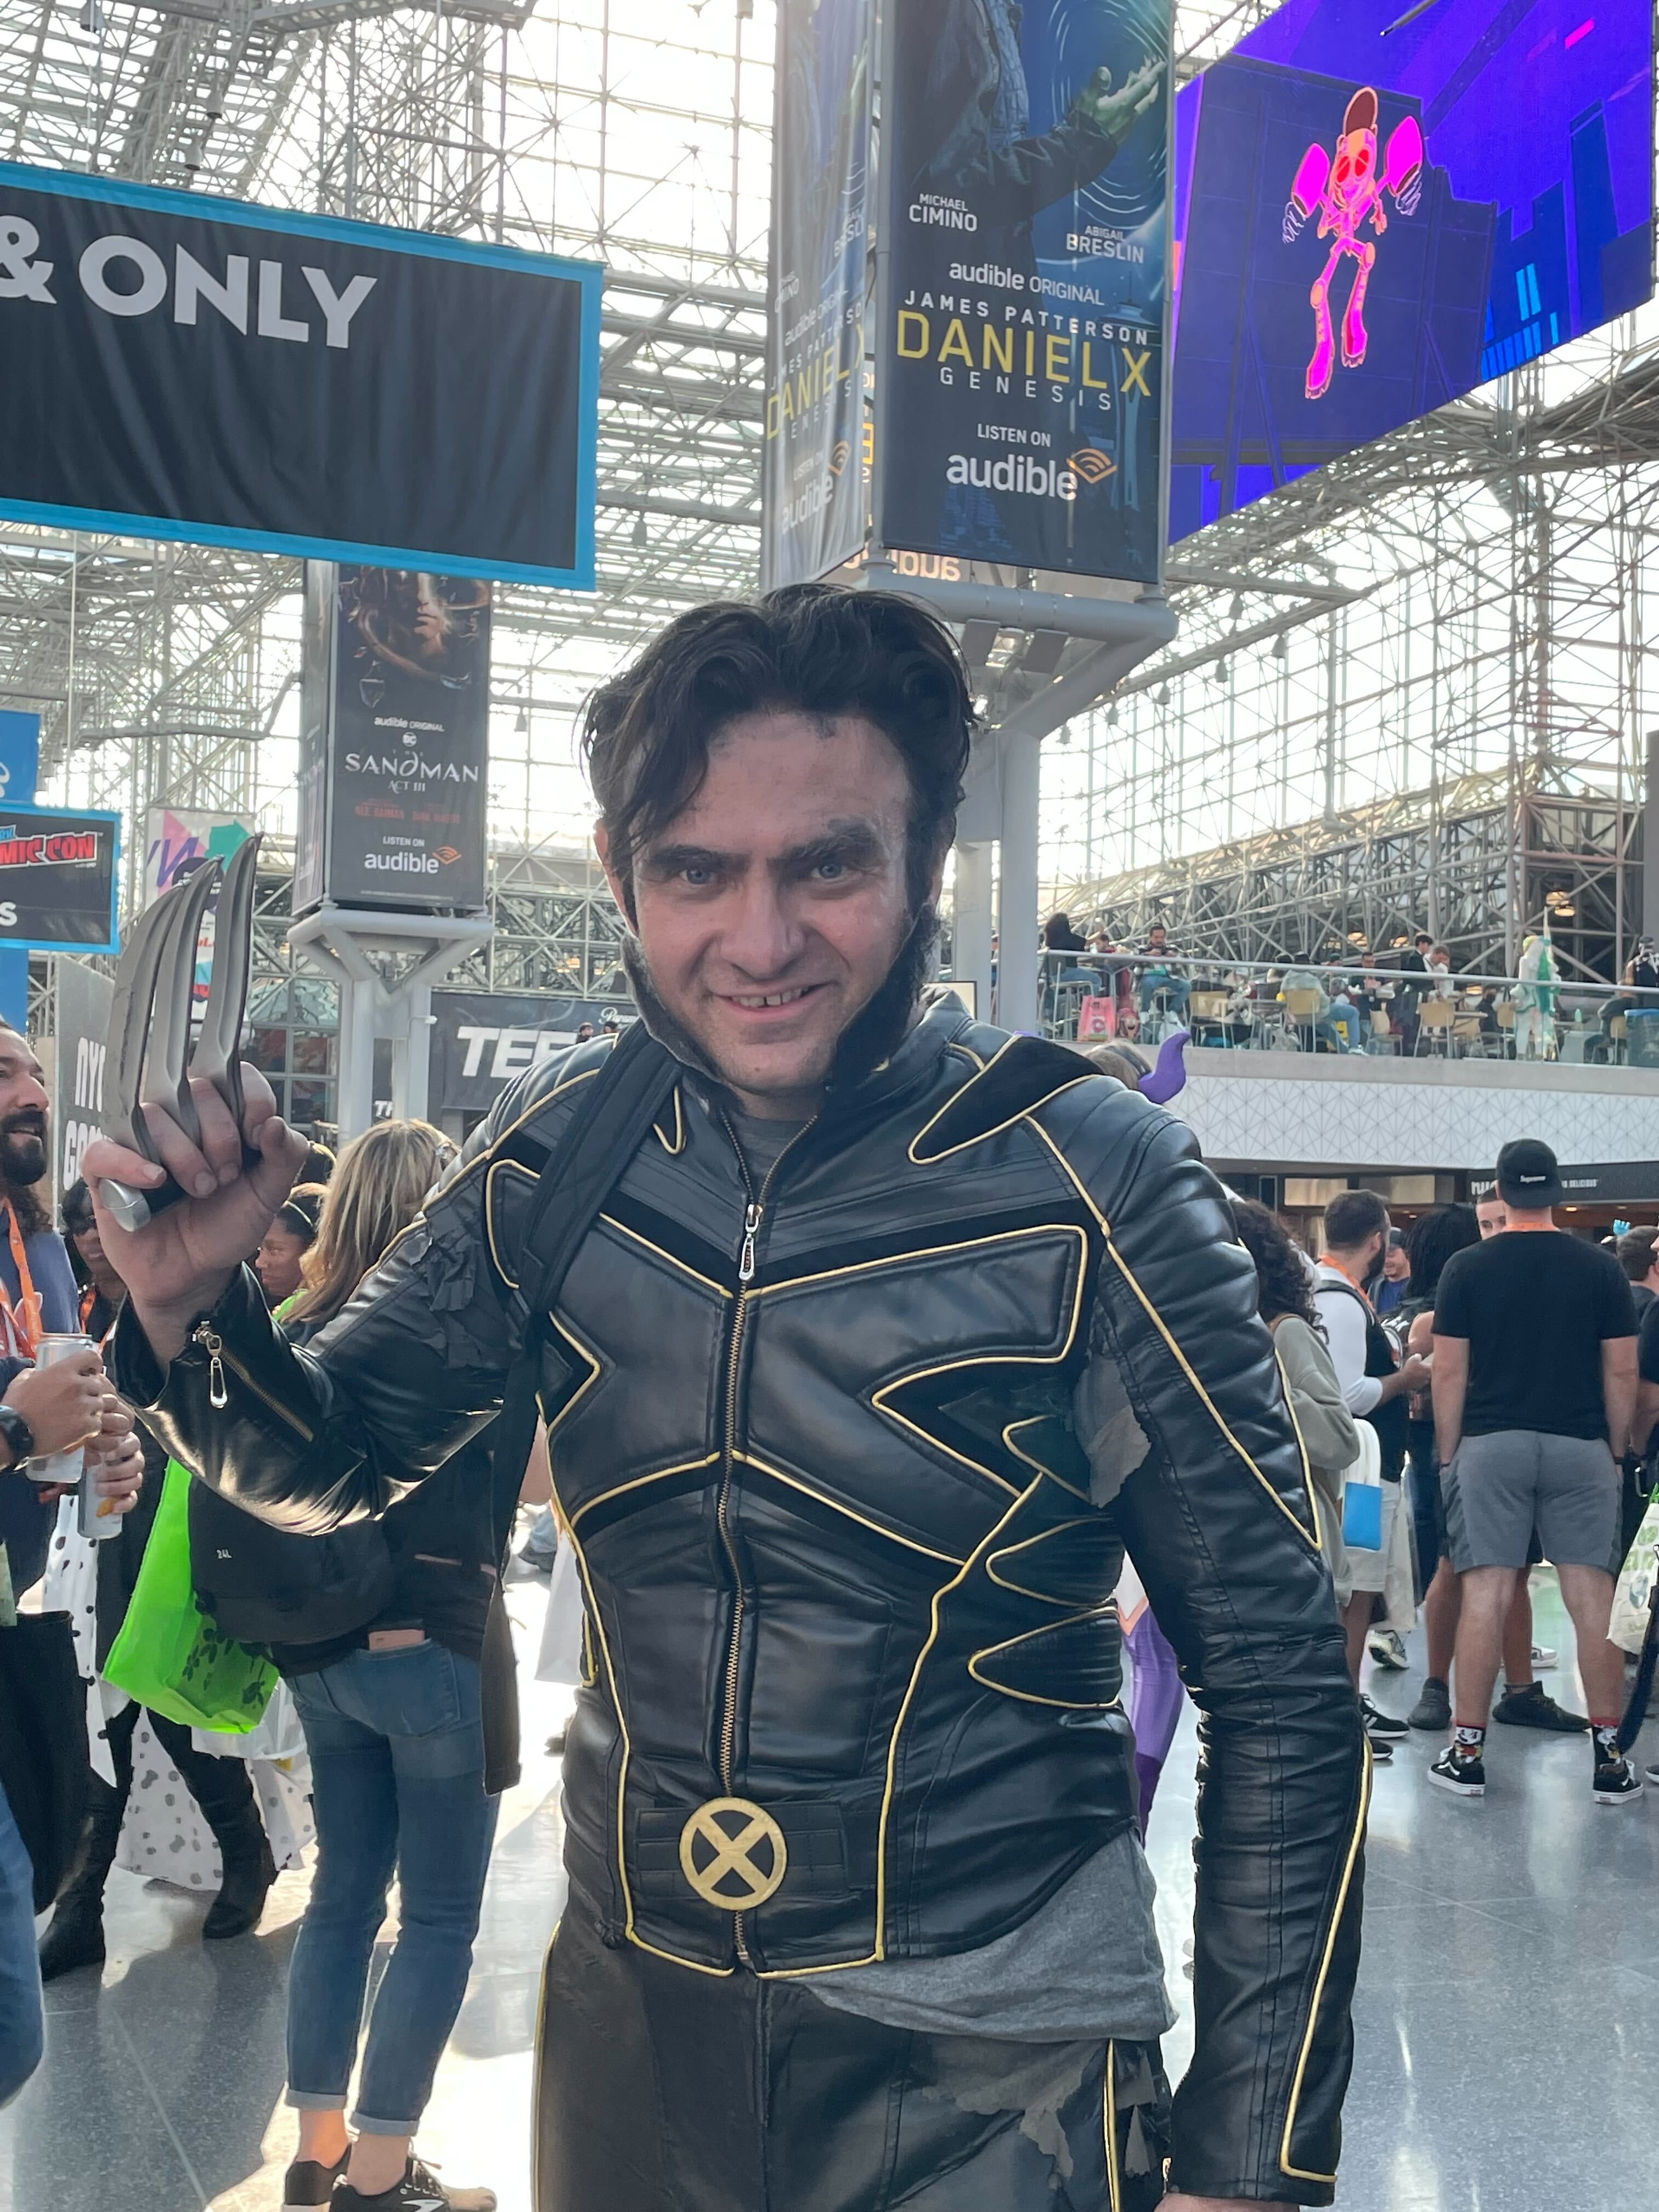 New York Comic Con Cosplay - costume - & Only Tep James s Danielx audible